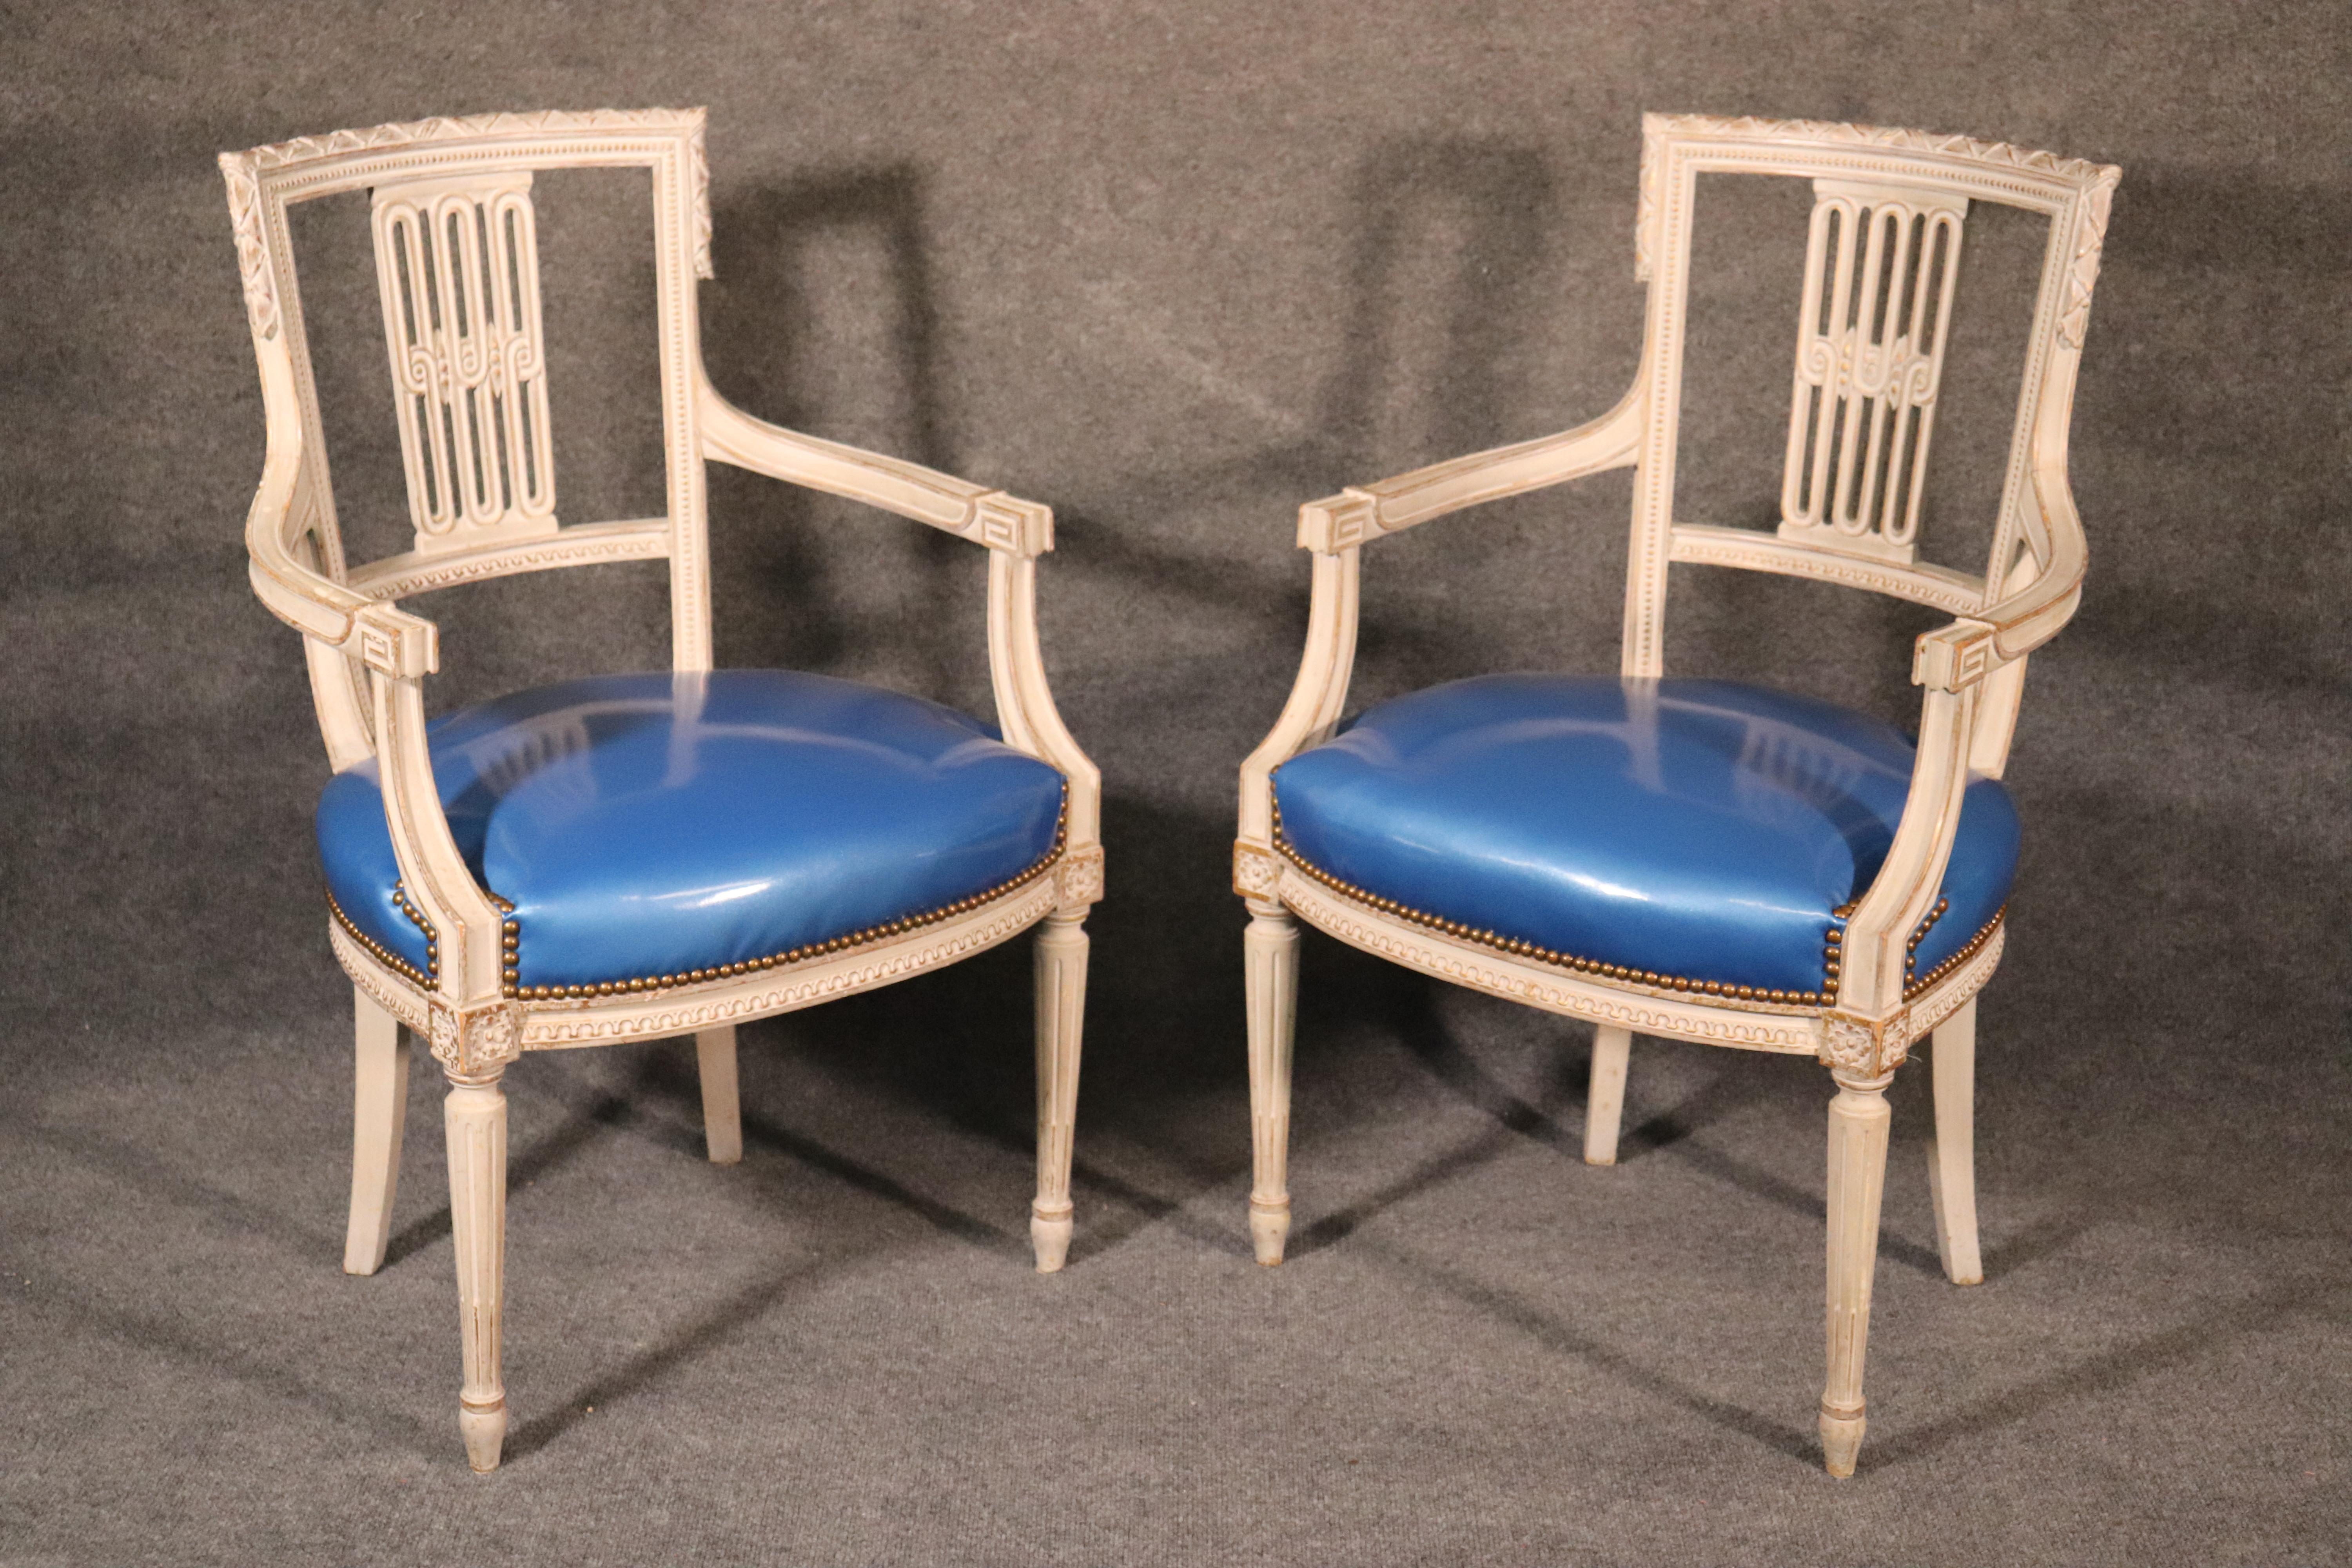 This is a rare set of white painted Louis XVI style Maison Jansen arm chairs-these are all armchairs with no side chairs, circa 1950. The chairs have hints of actual gold leaf underneat the white which is extremely subtle and sophisticated. The